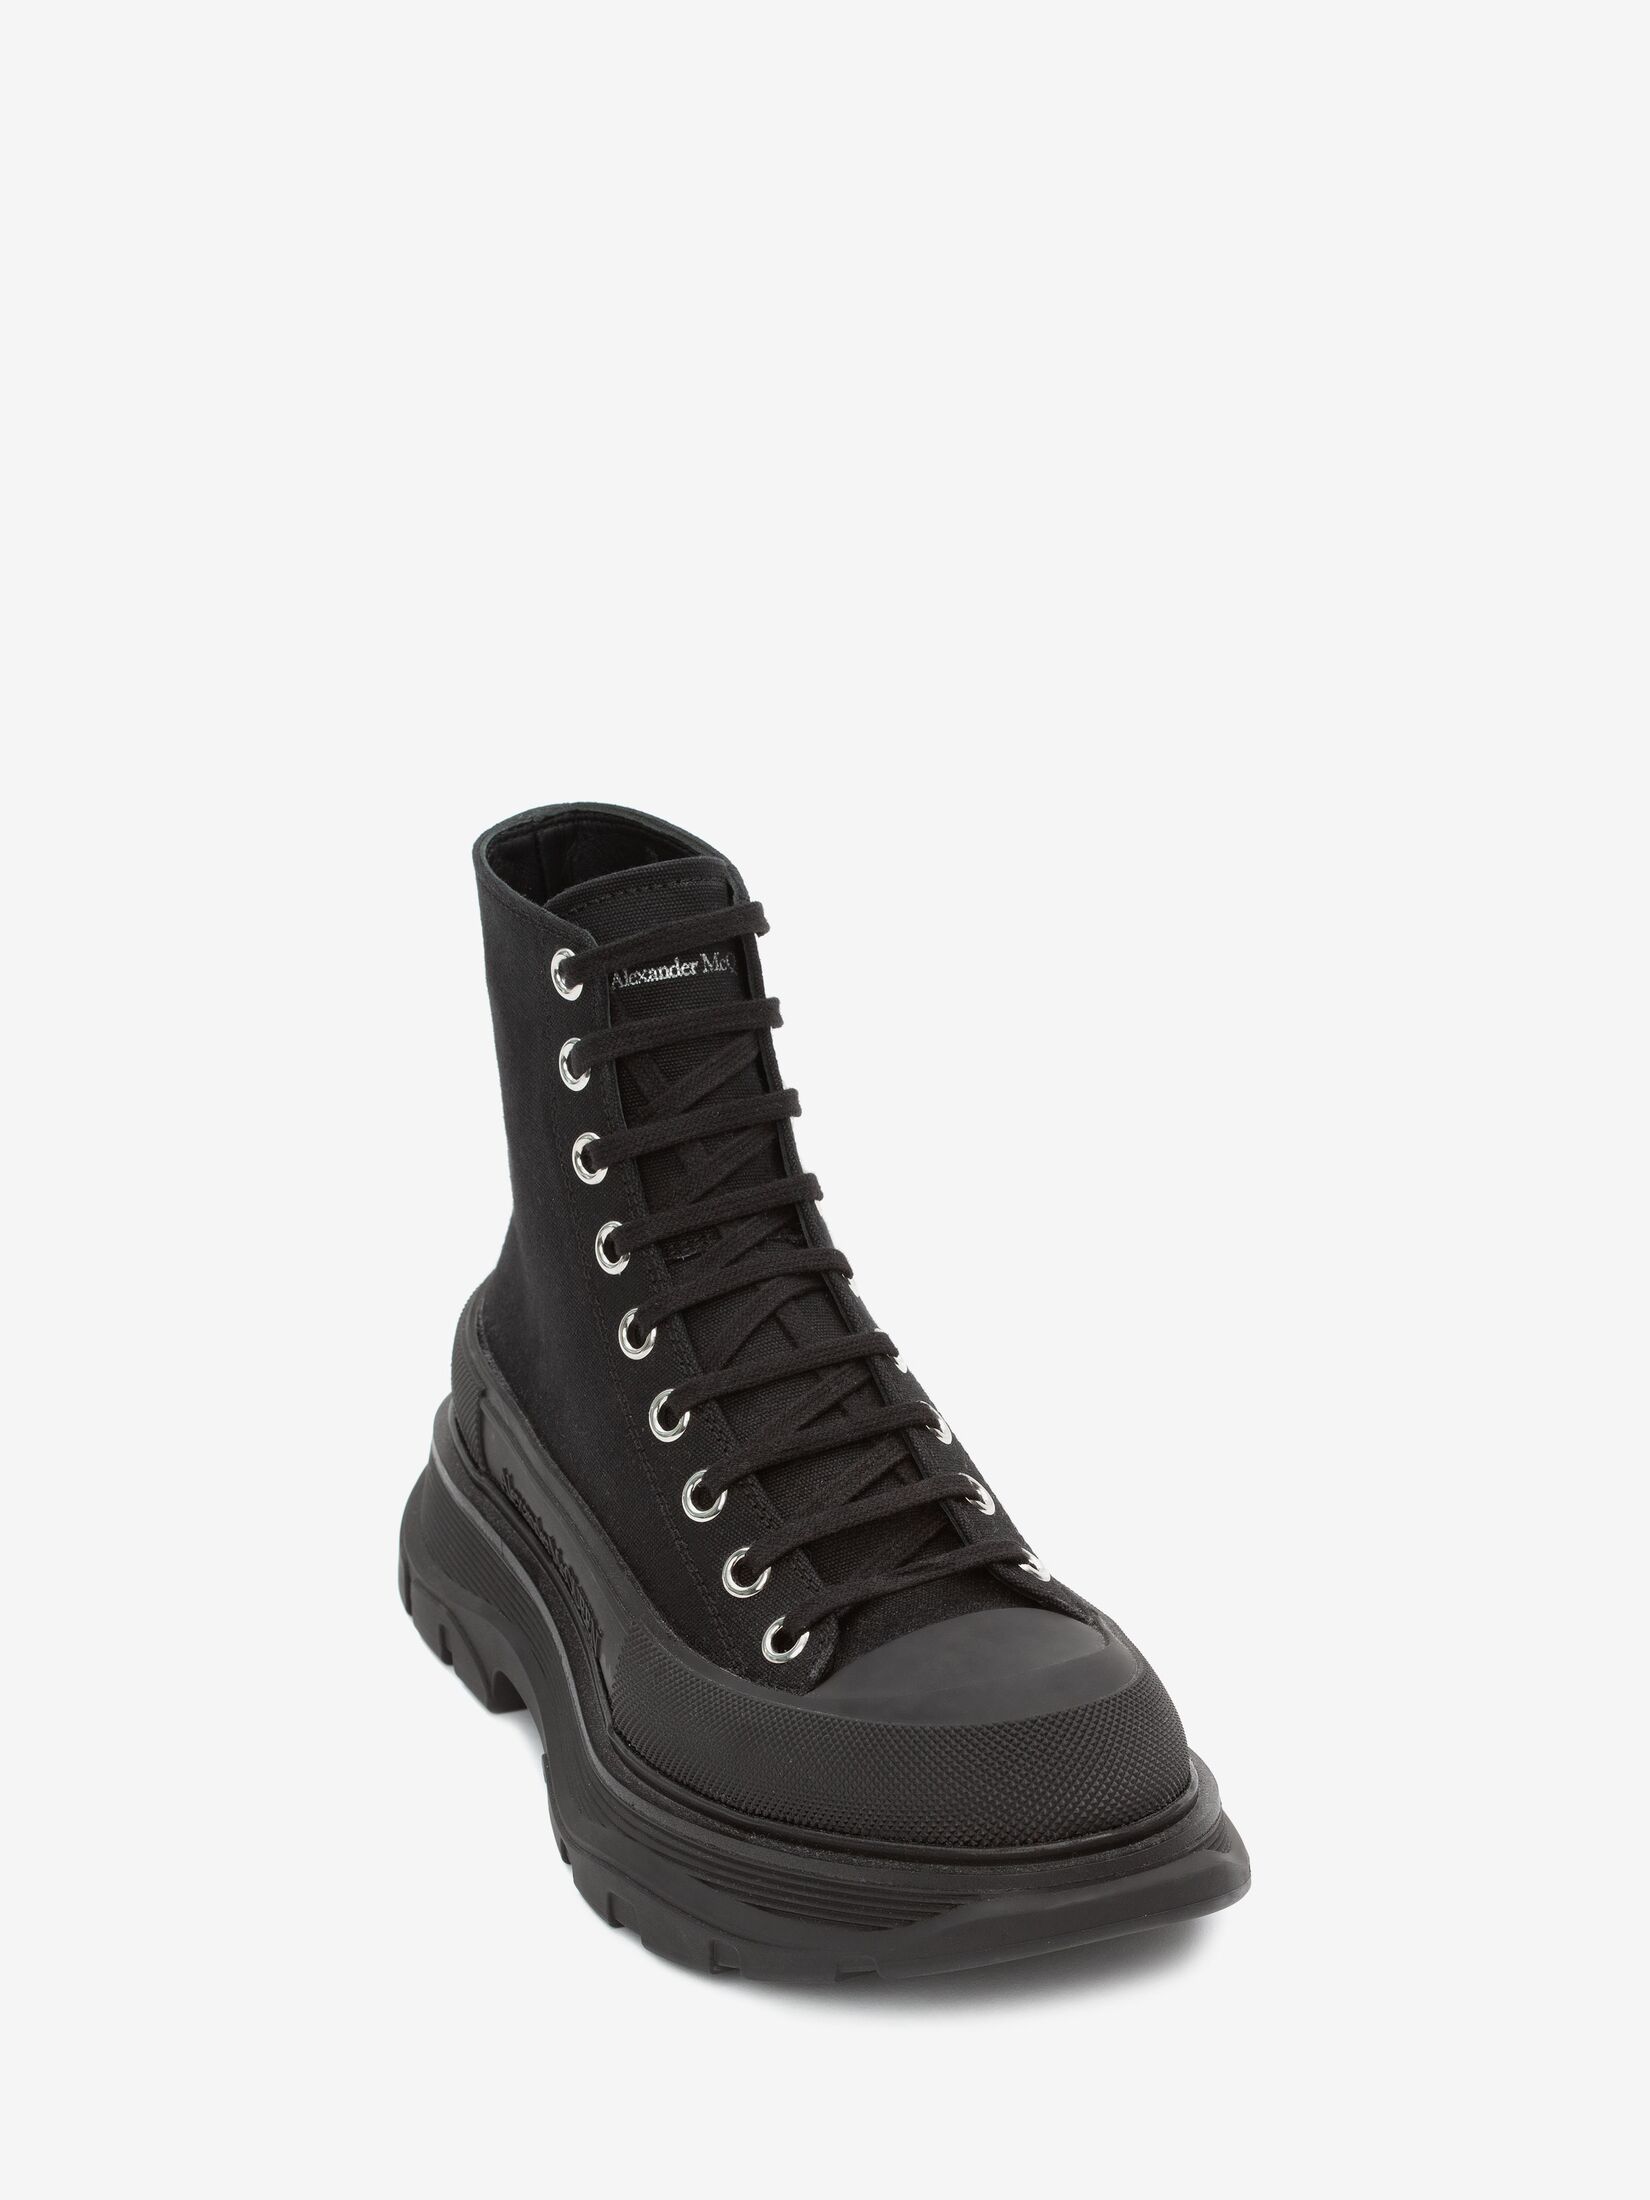 Alexander McQueen◇Tread Slick Lace Up/トレッドスリックレース ...